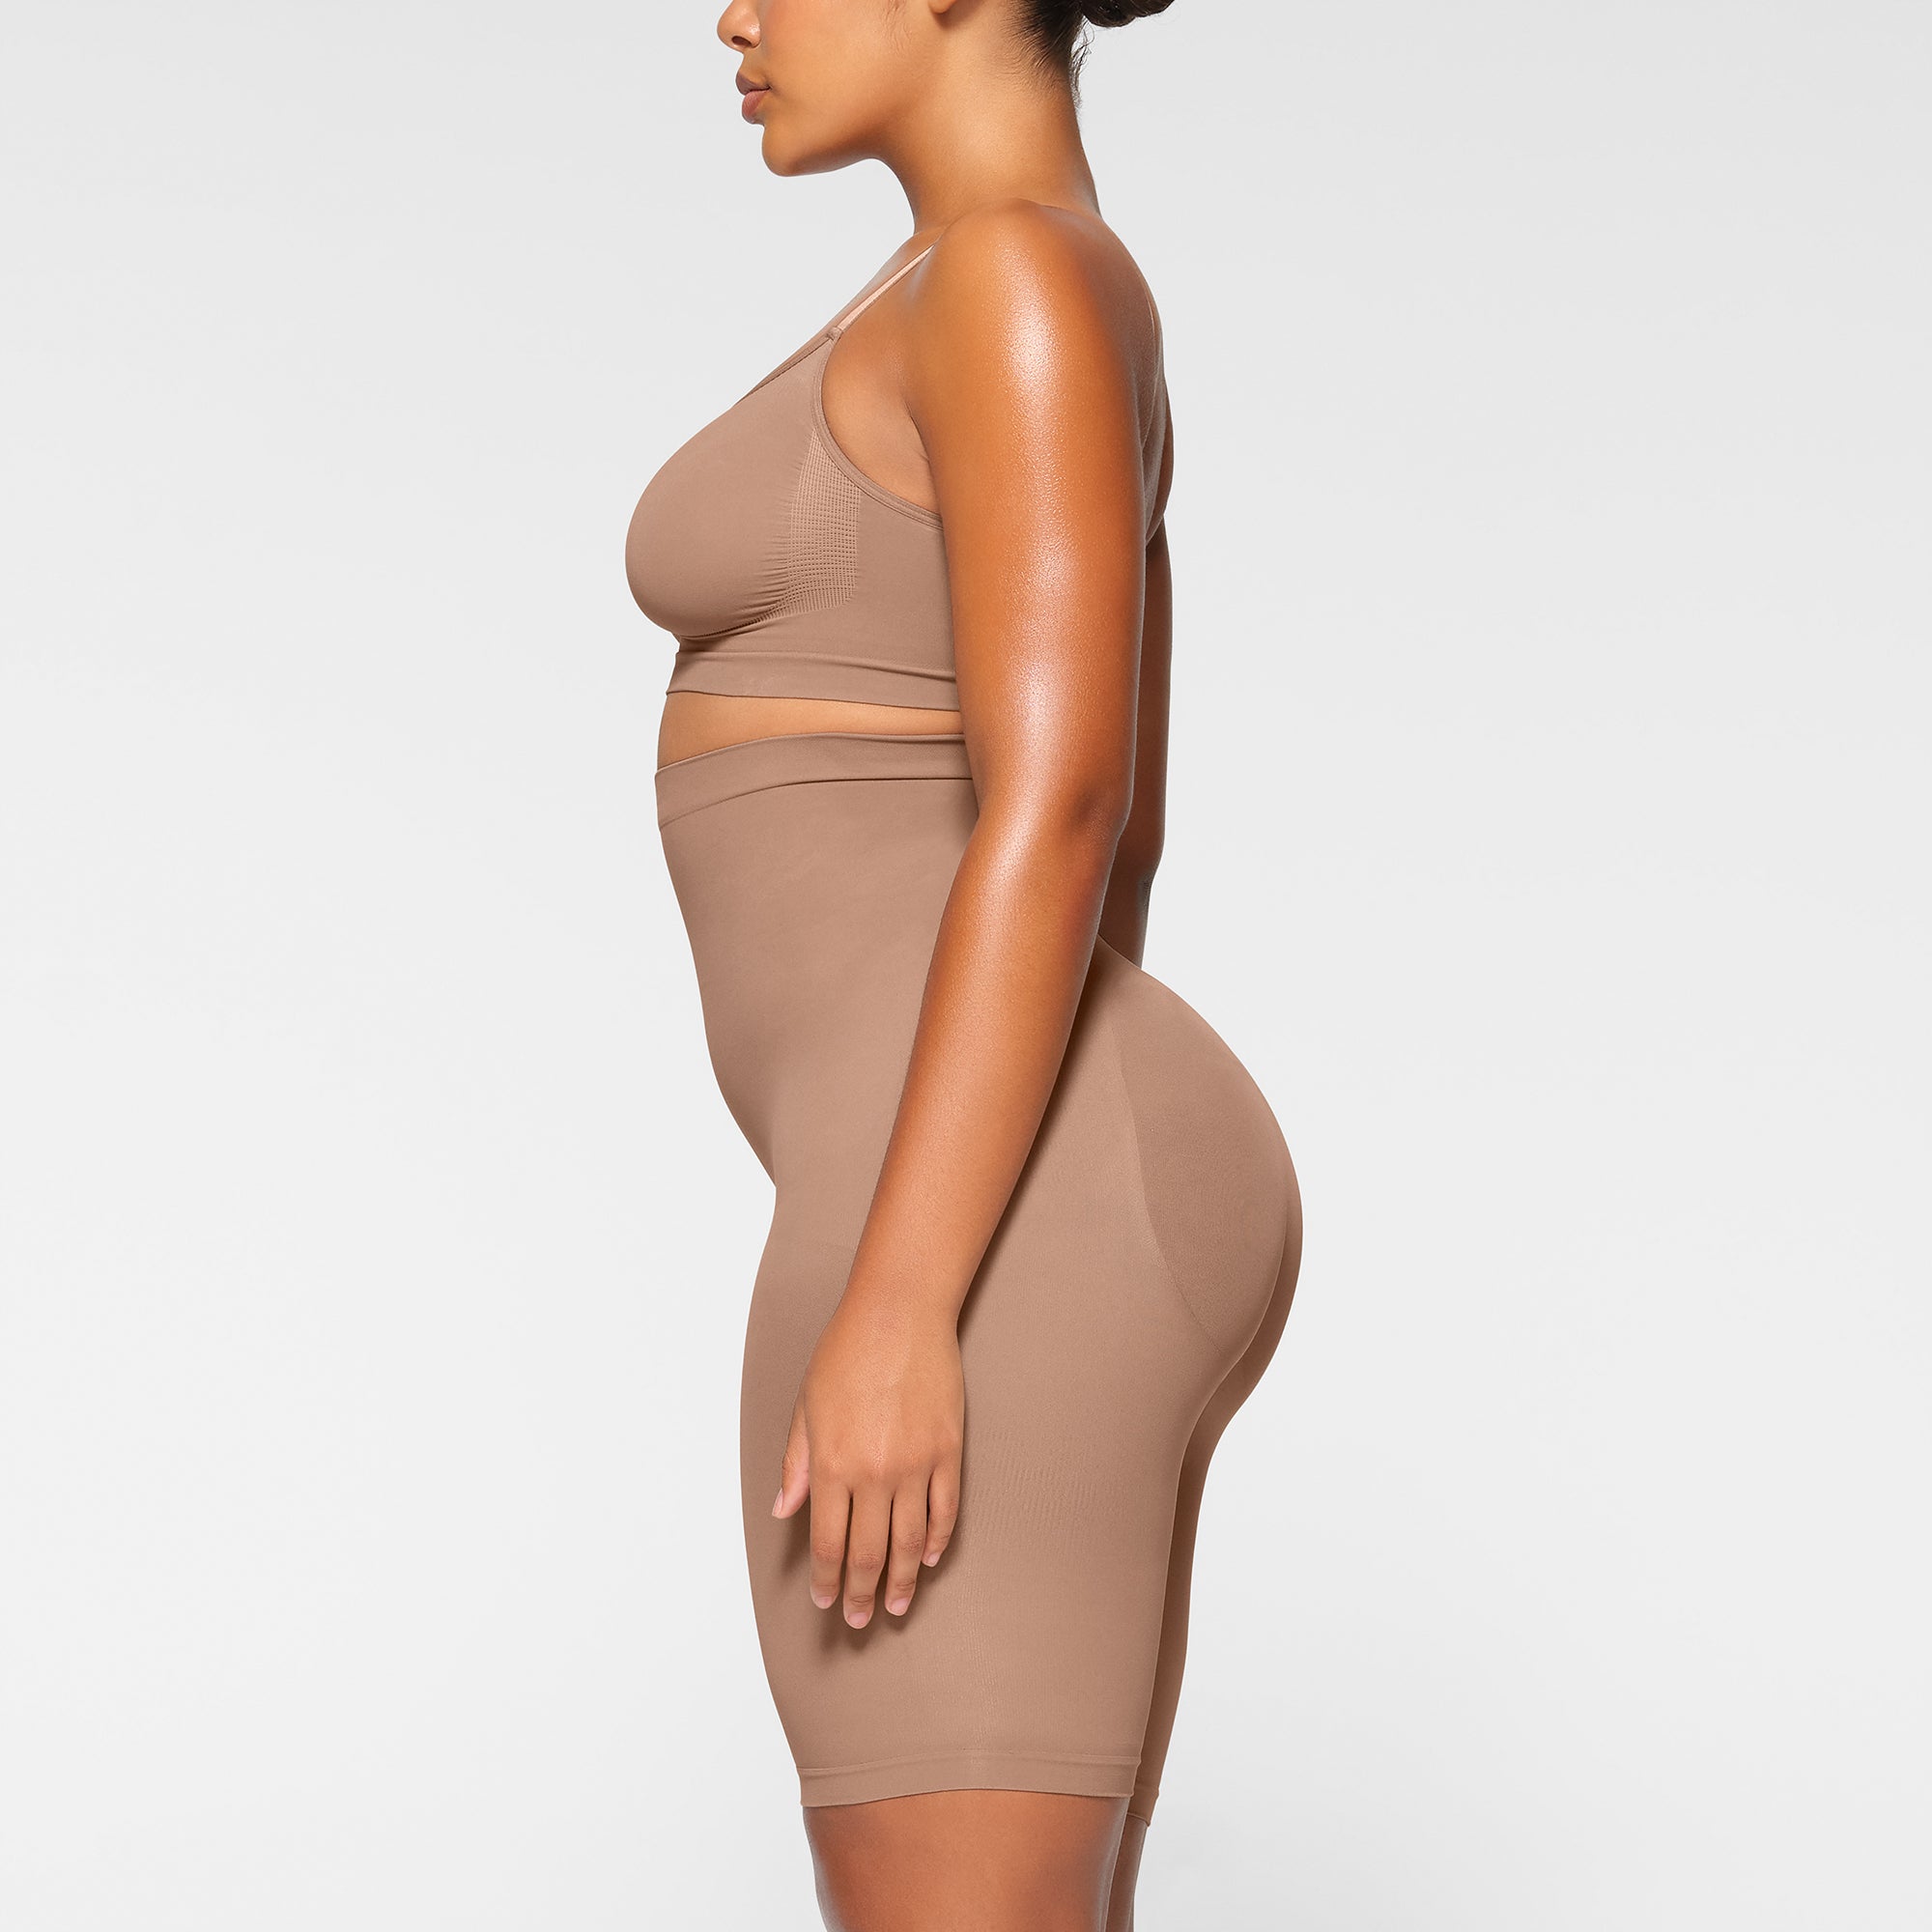 Track Barely There Low Back Short - Sienna - XL at Skims